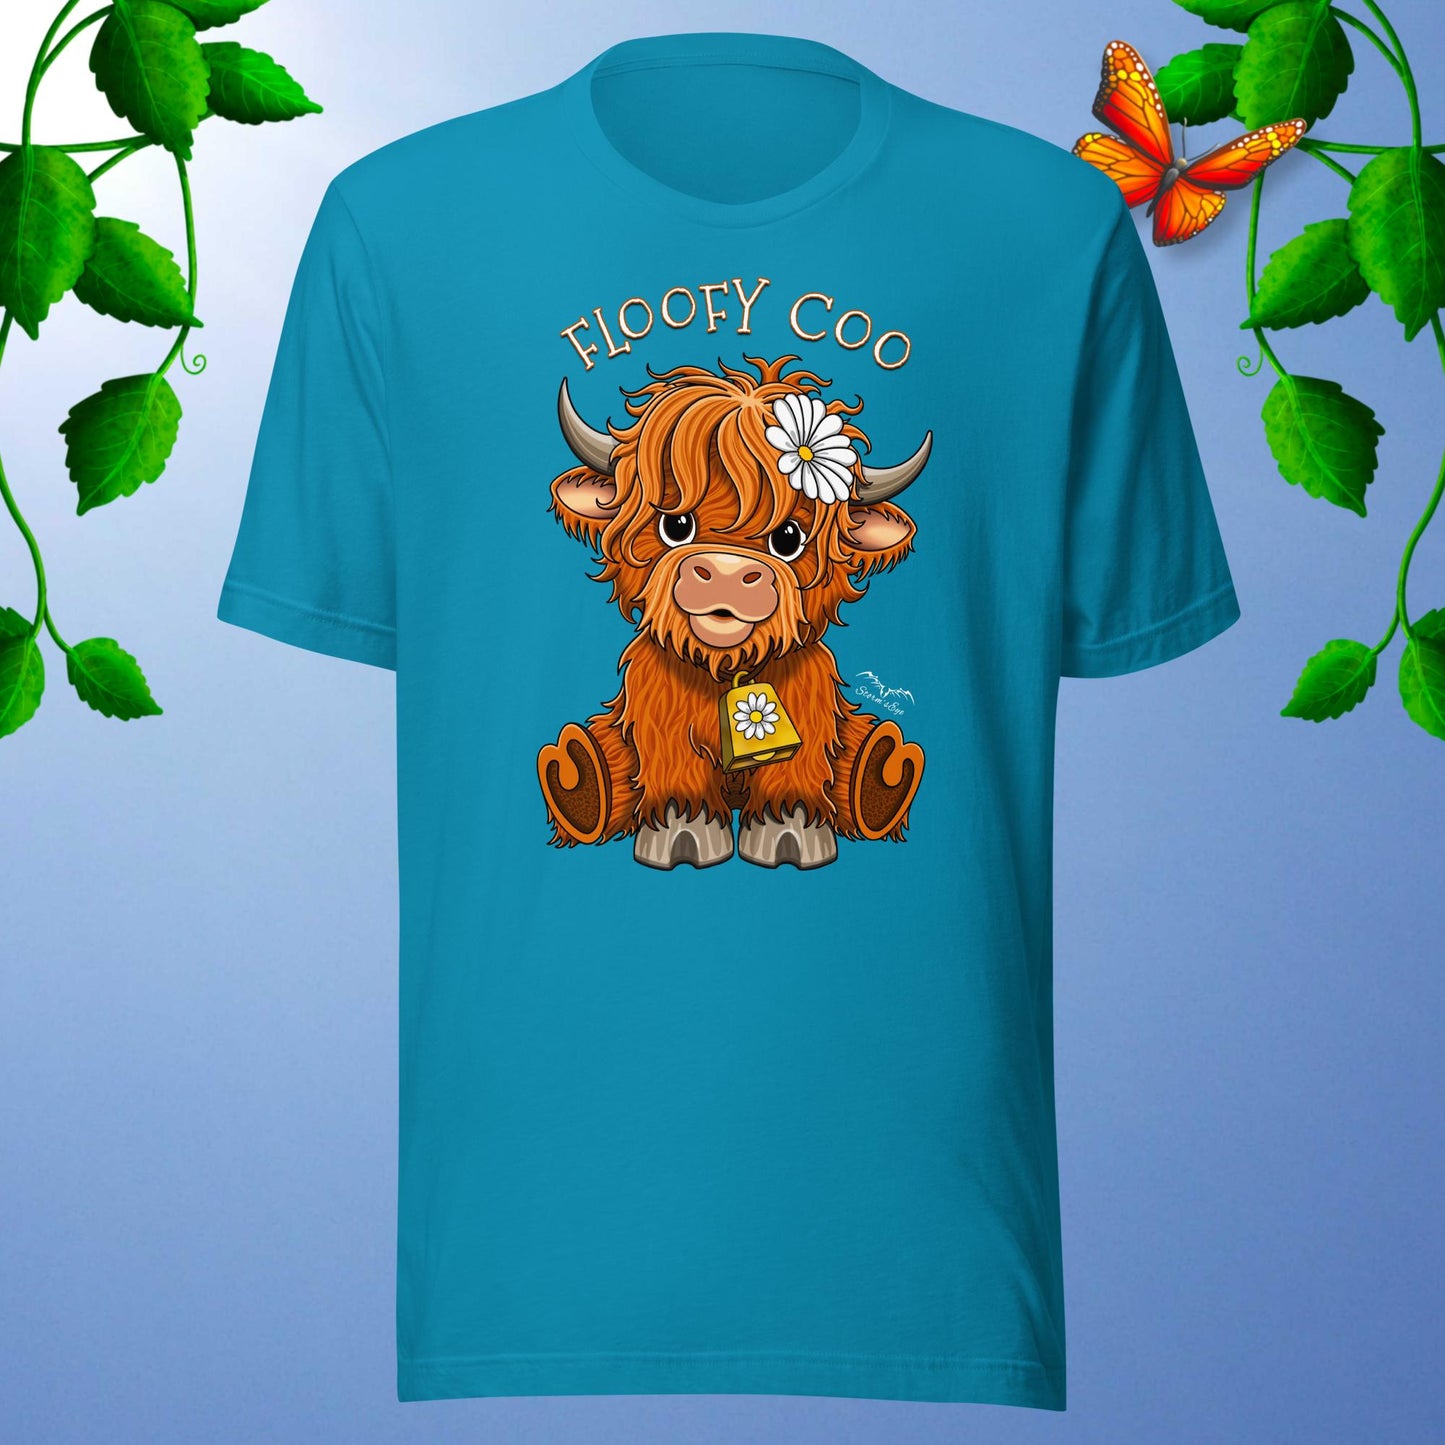 floofy coo highland cow T-shirt, bright blue by Stormseye Design